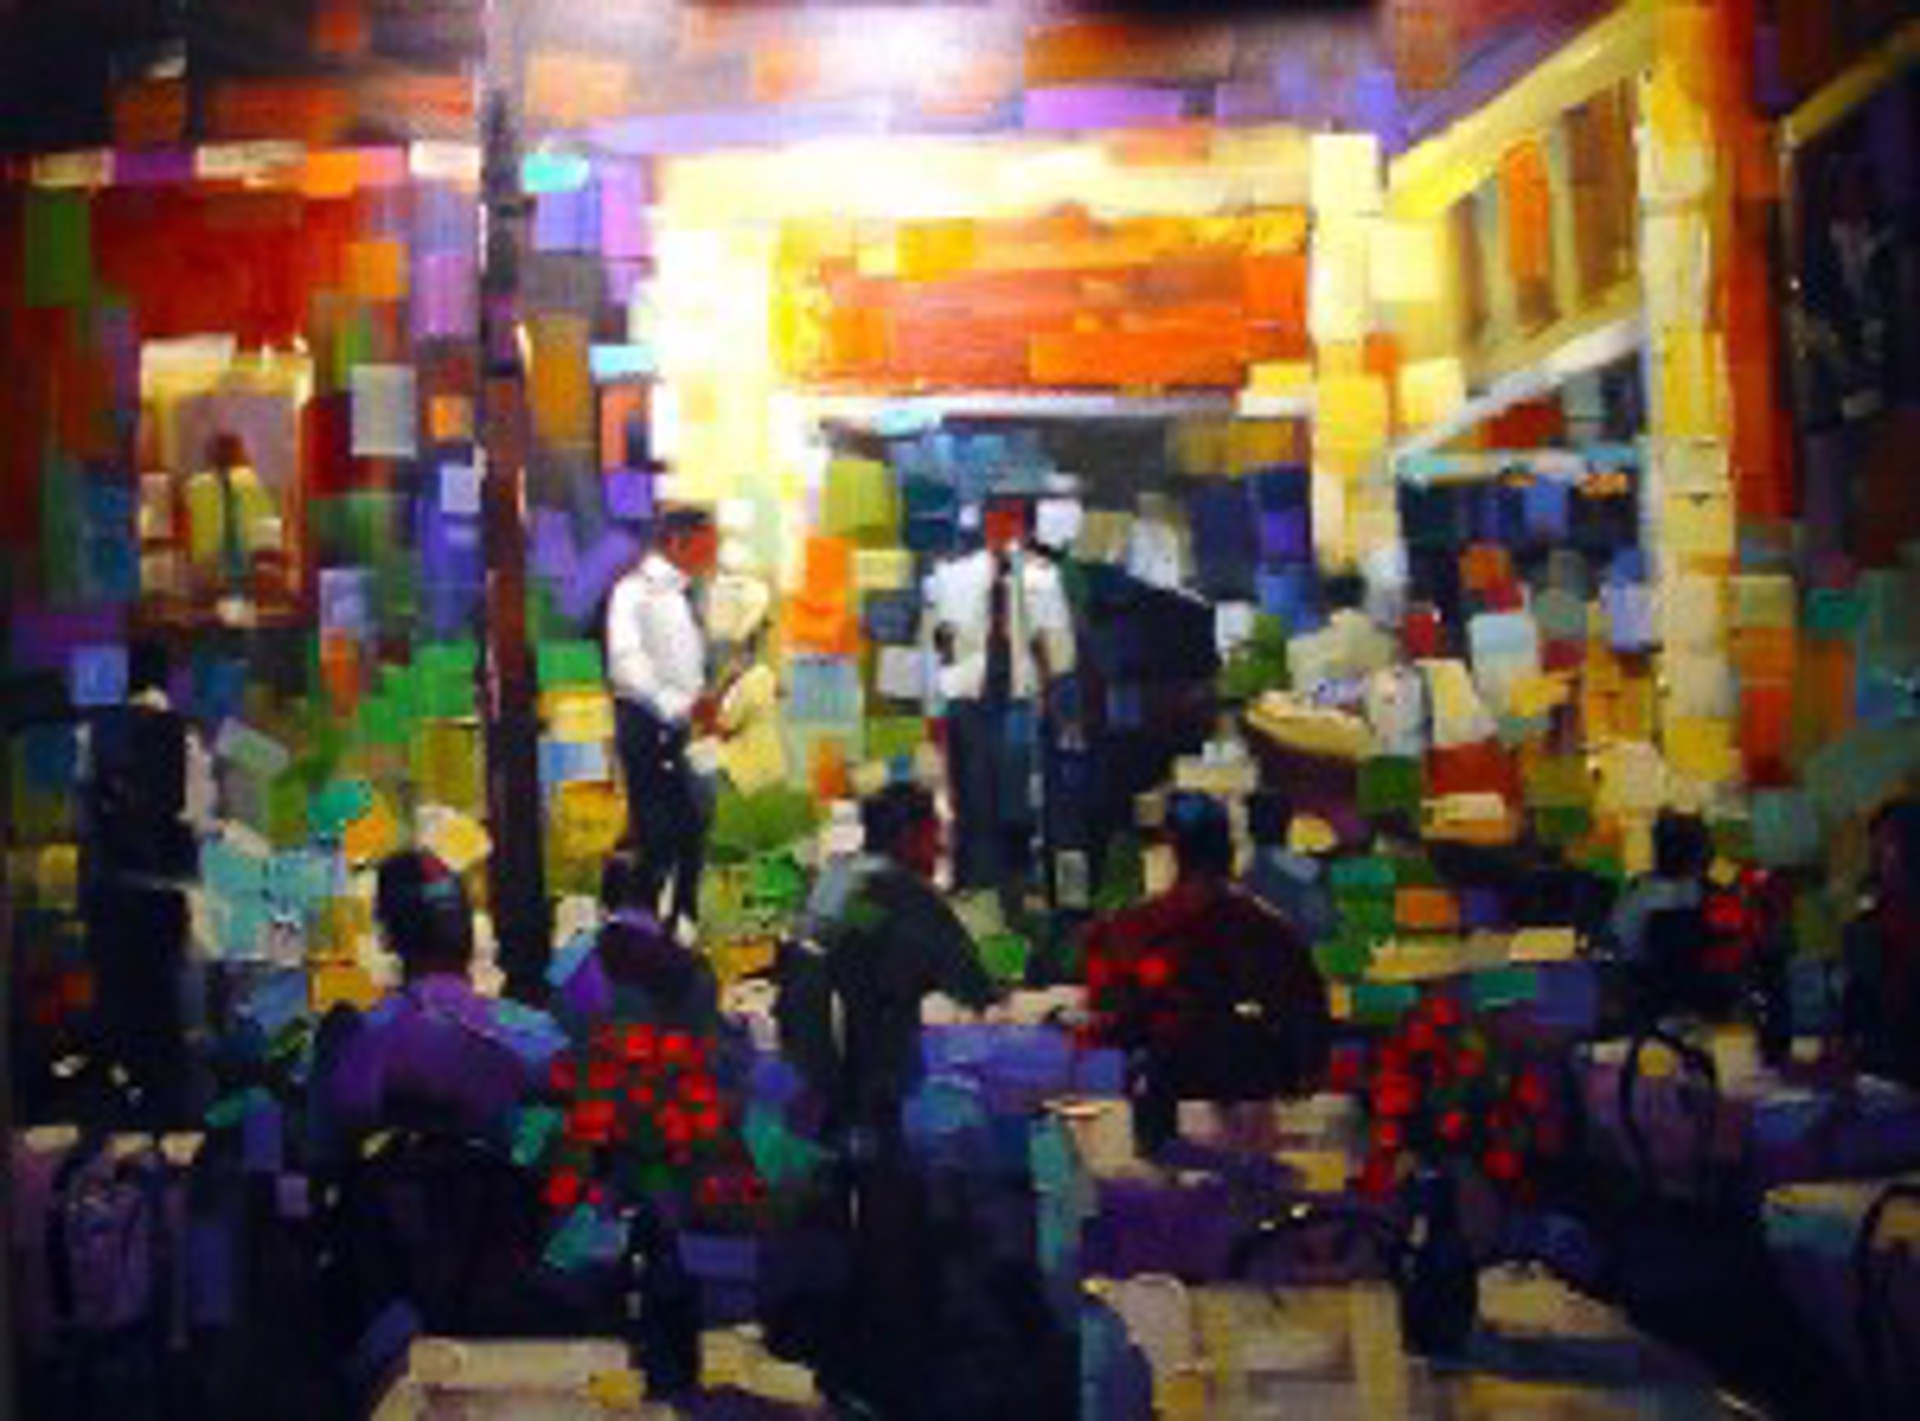 Martinis and Jazz by Michael Flohr